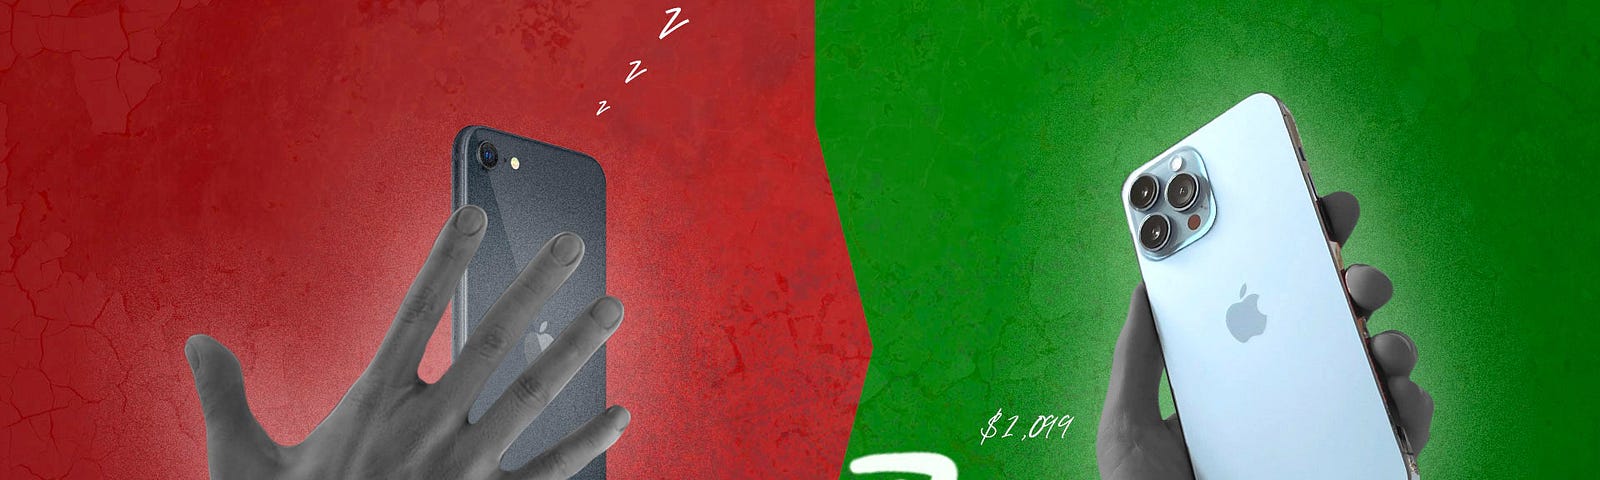 An illustration of a hand reaching for an iPhone SE with a red background on the left with hands pulling it to the right of the illustration where an iPhone 13 Pro Max rests in the palm of another hand on a green background. Above the iPhone SE a cursive label reads “Regular” — above the iPhone 13 Pro Max the label reads “Ultra Premium”. Below the iPhone SE a pricetag reads “$429” with a white arrow pointing right to a label reads “$1,099” next to the iPhone 13 Pro Max.